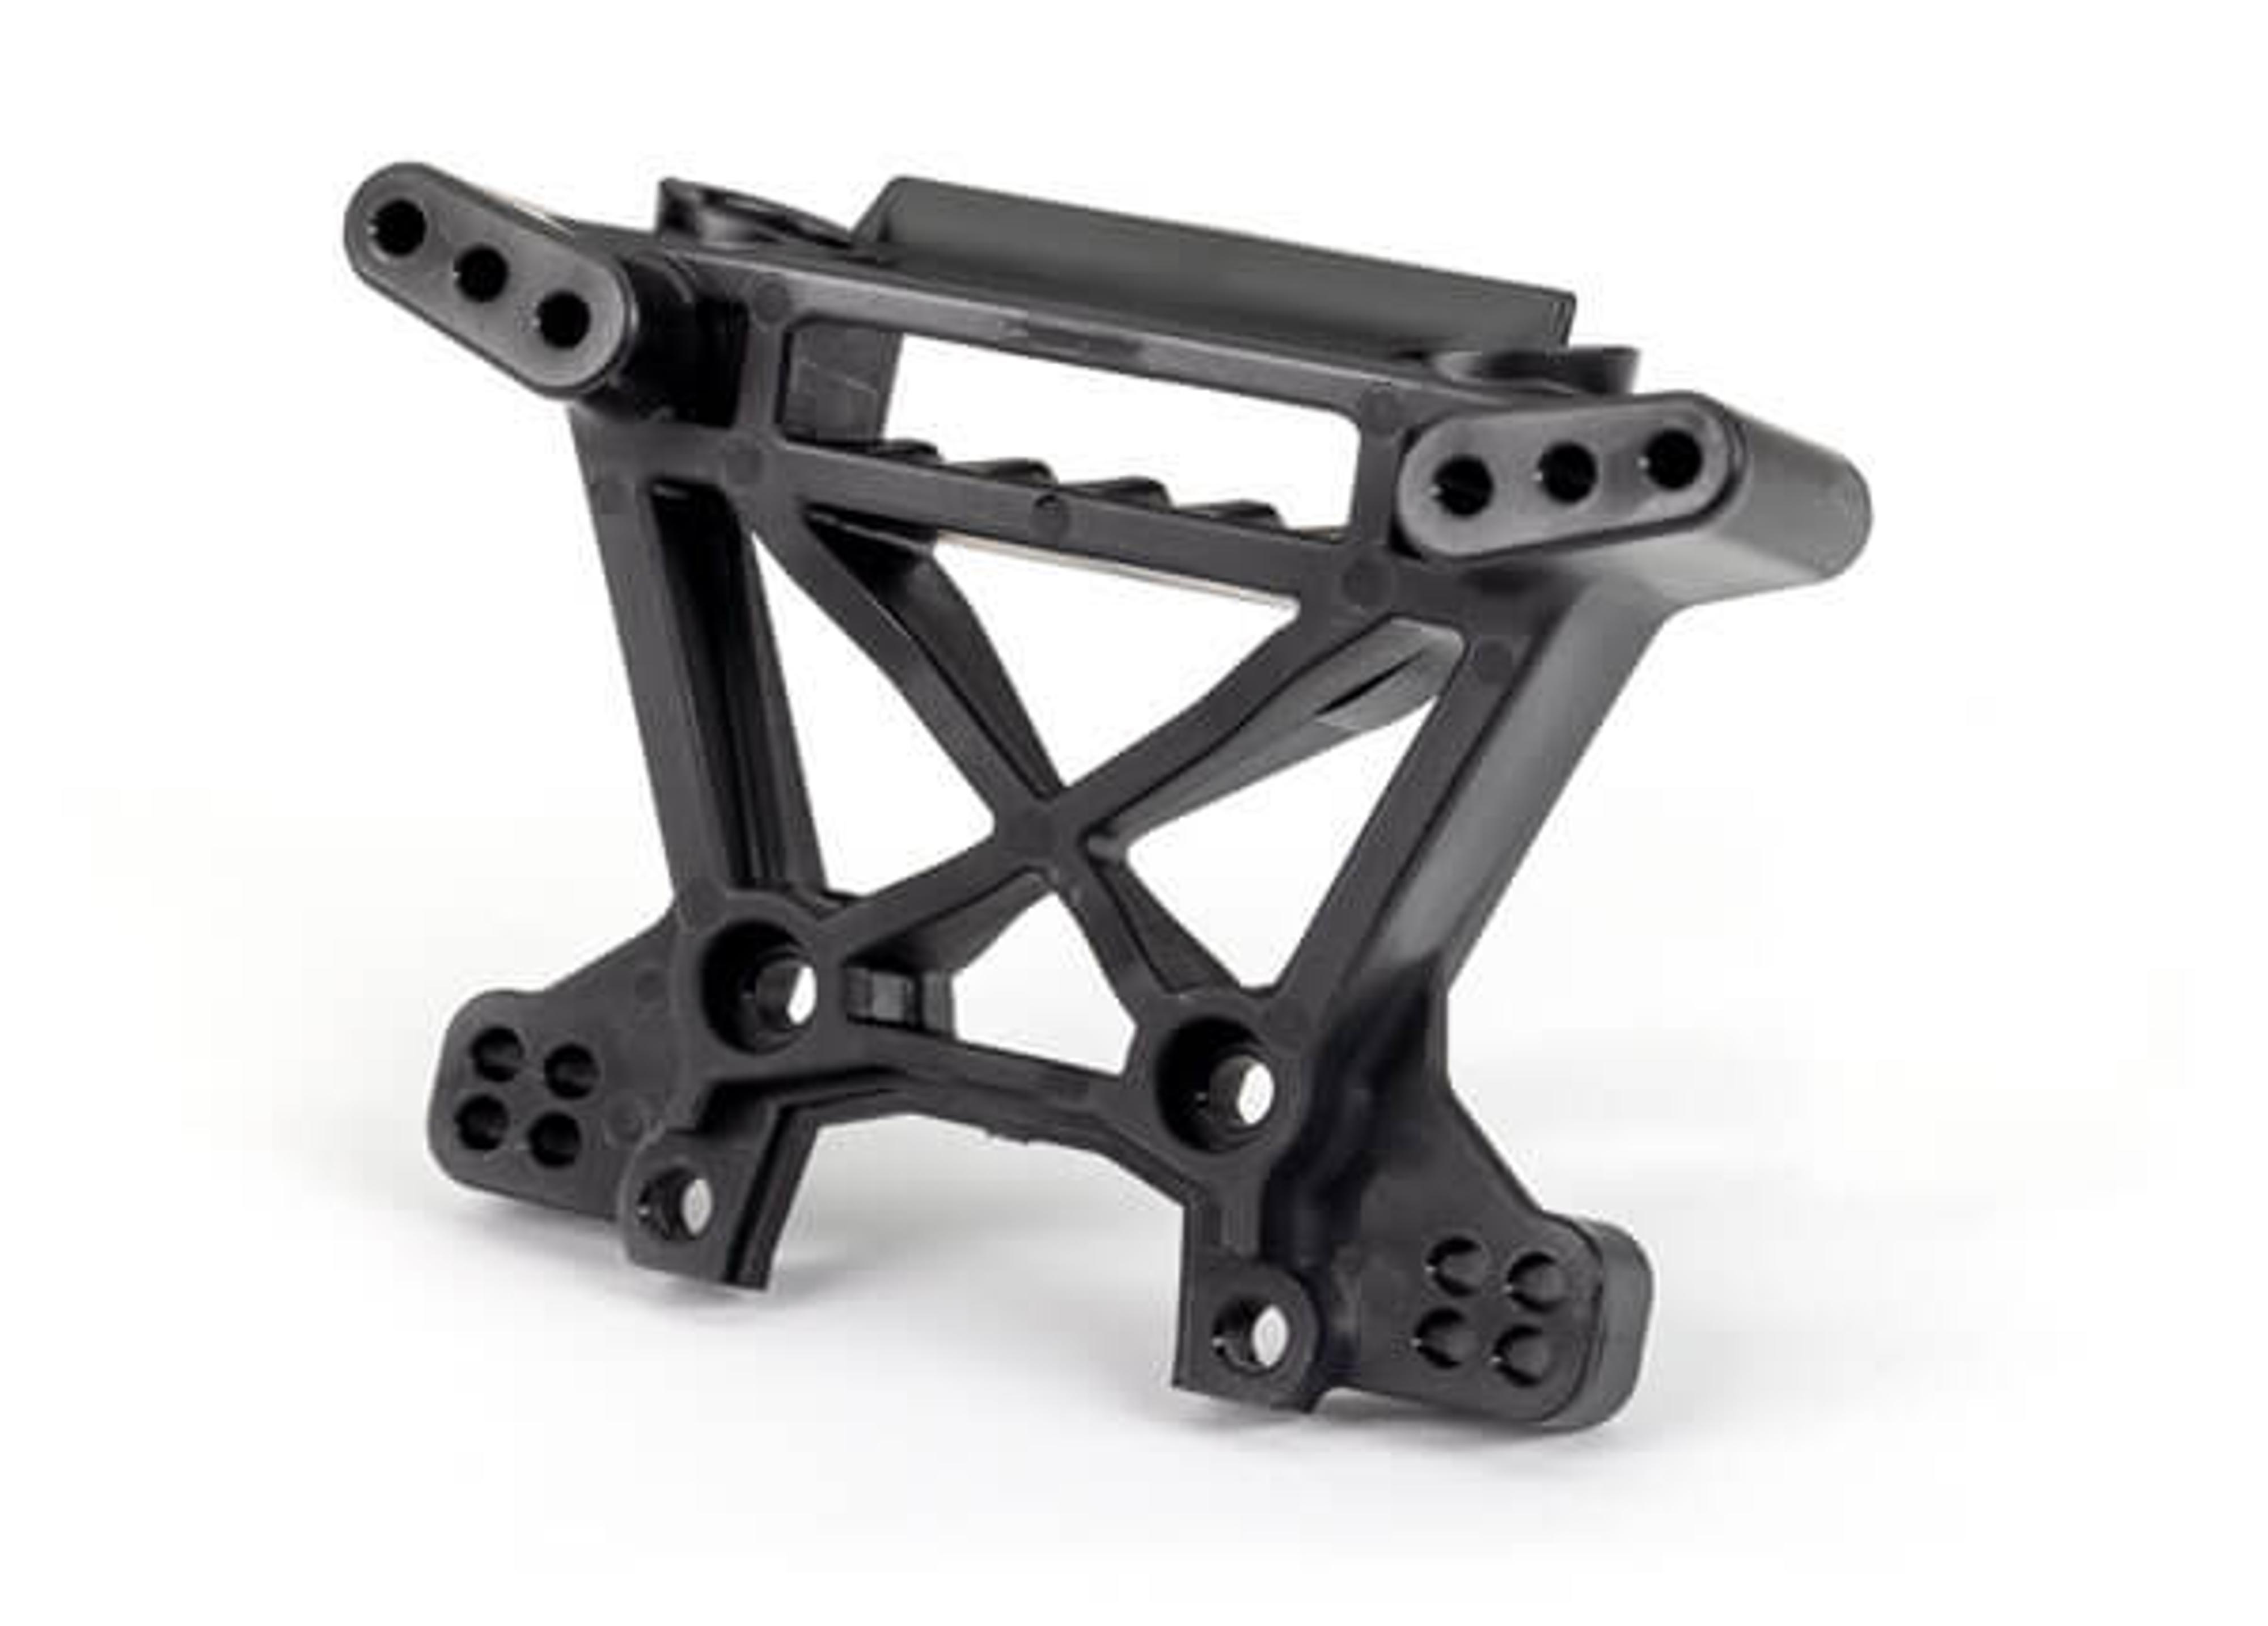 Shock Tower Fr Extreme Heavy Duty for #9080 Upgrade Kit (Black)